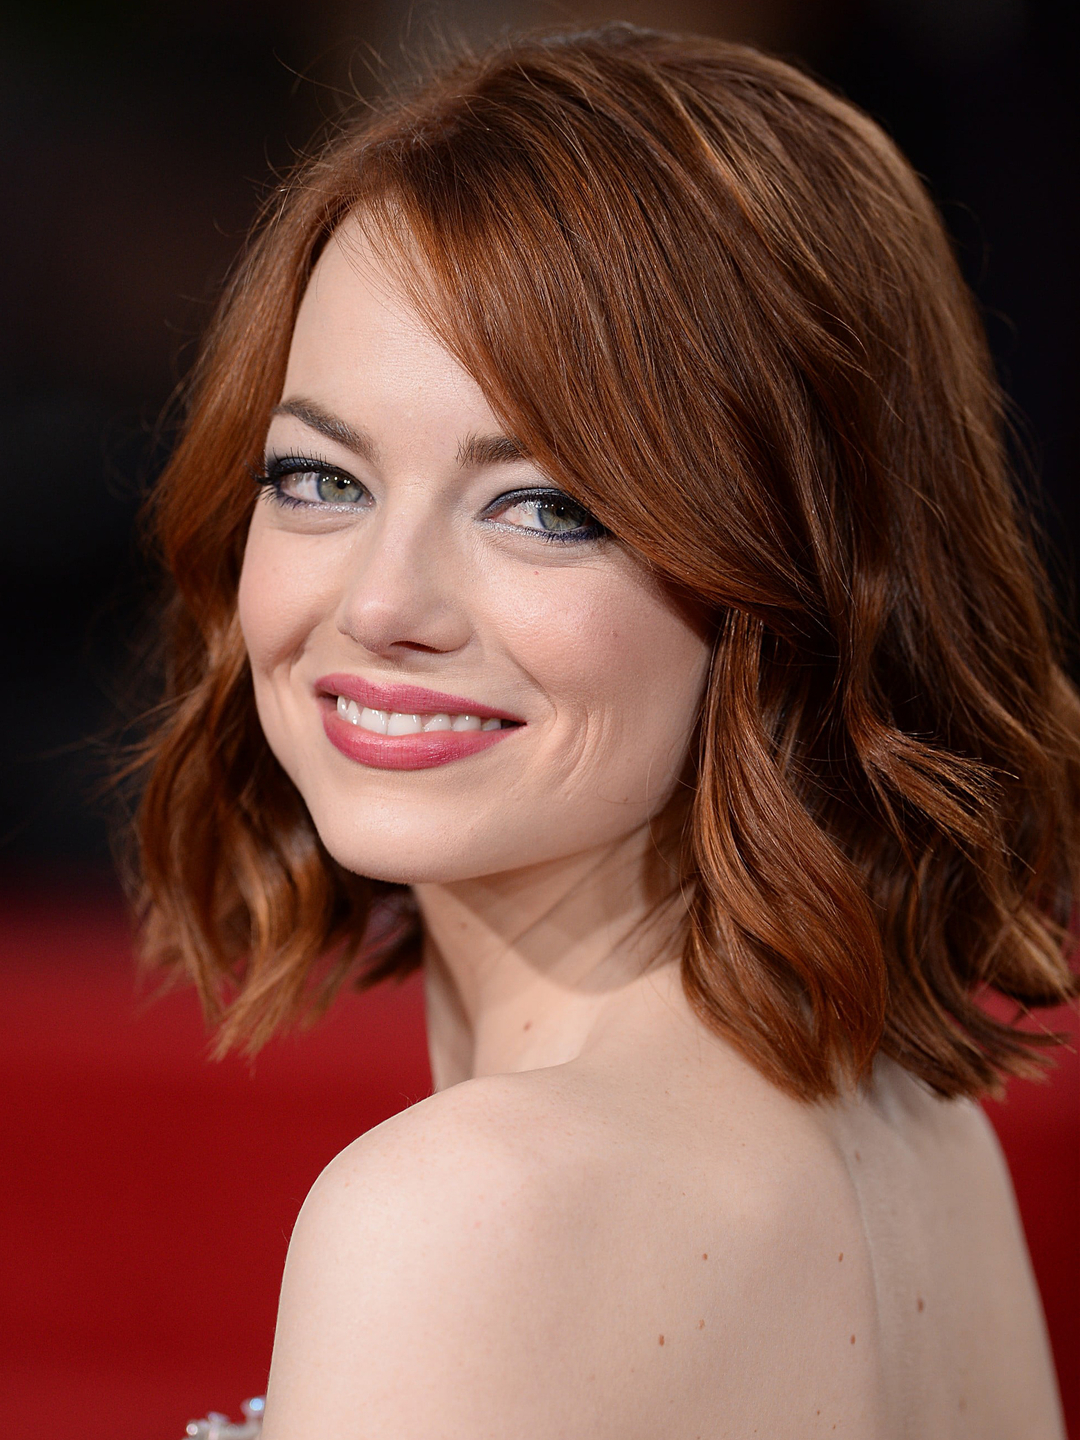 Emma Stone young age